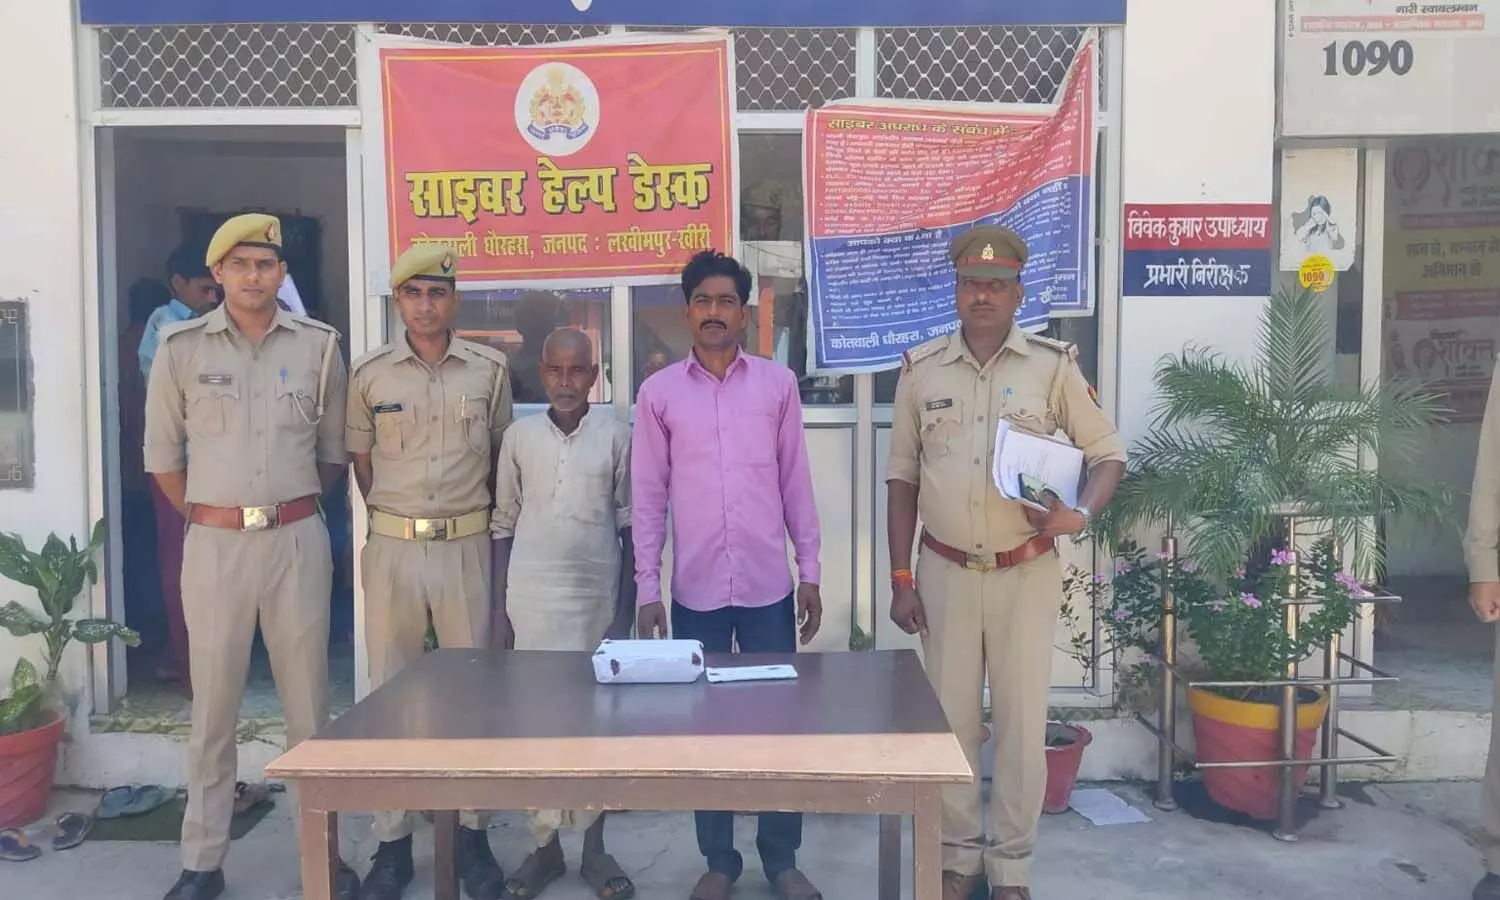 Gang arrested for withdrawing money from accounts of deceased people in Lakhimpur Kheri